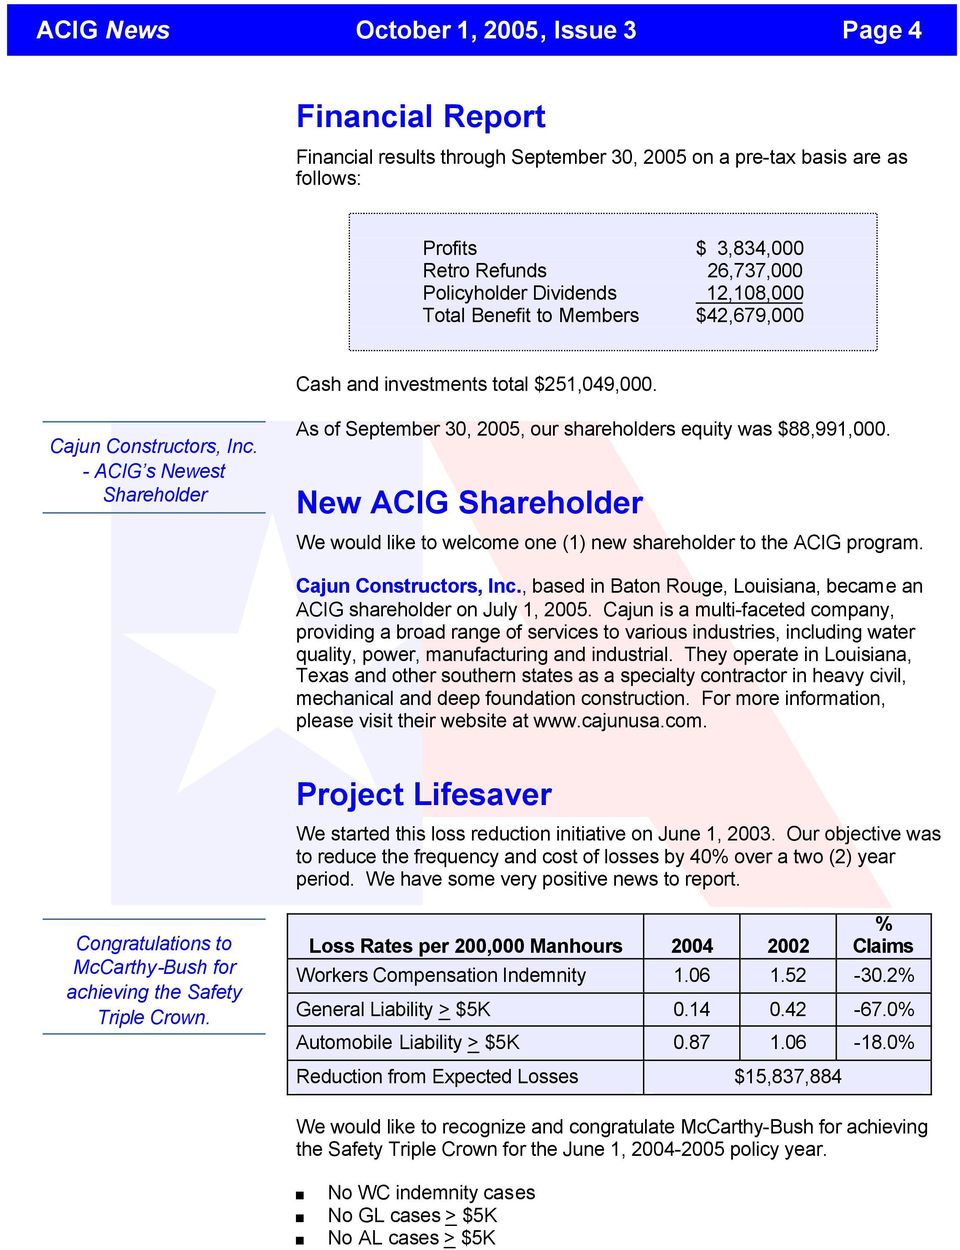 - ACIG s Newest Shareholder As of September 30, 2005, our shareholders equity was $88,991,000. New ACIG Shareholder We would like to welcome one (1) new shareholder to the ACIG program.